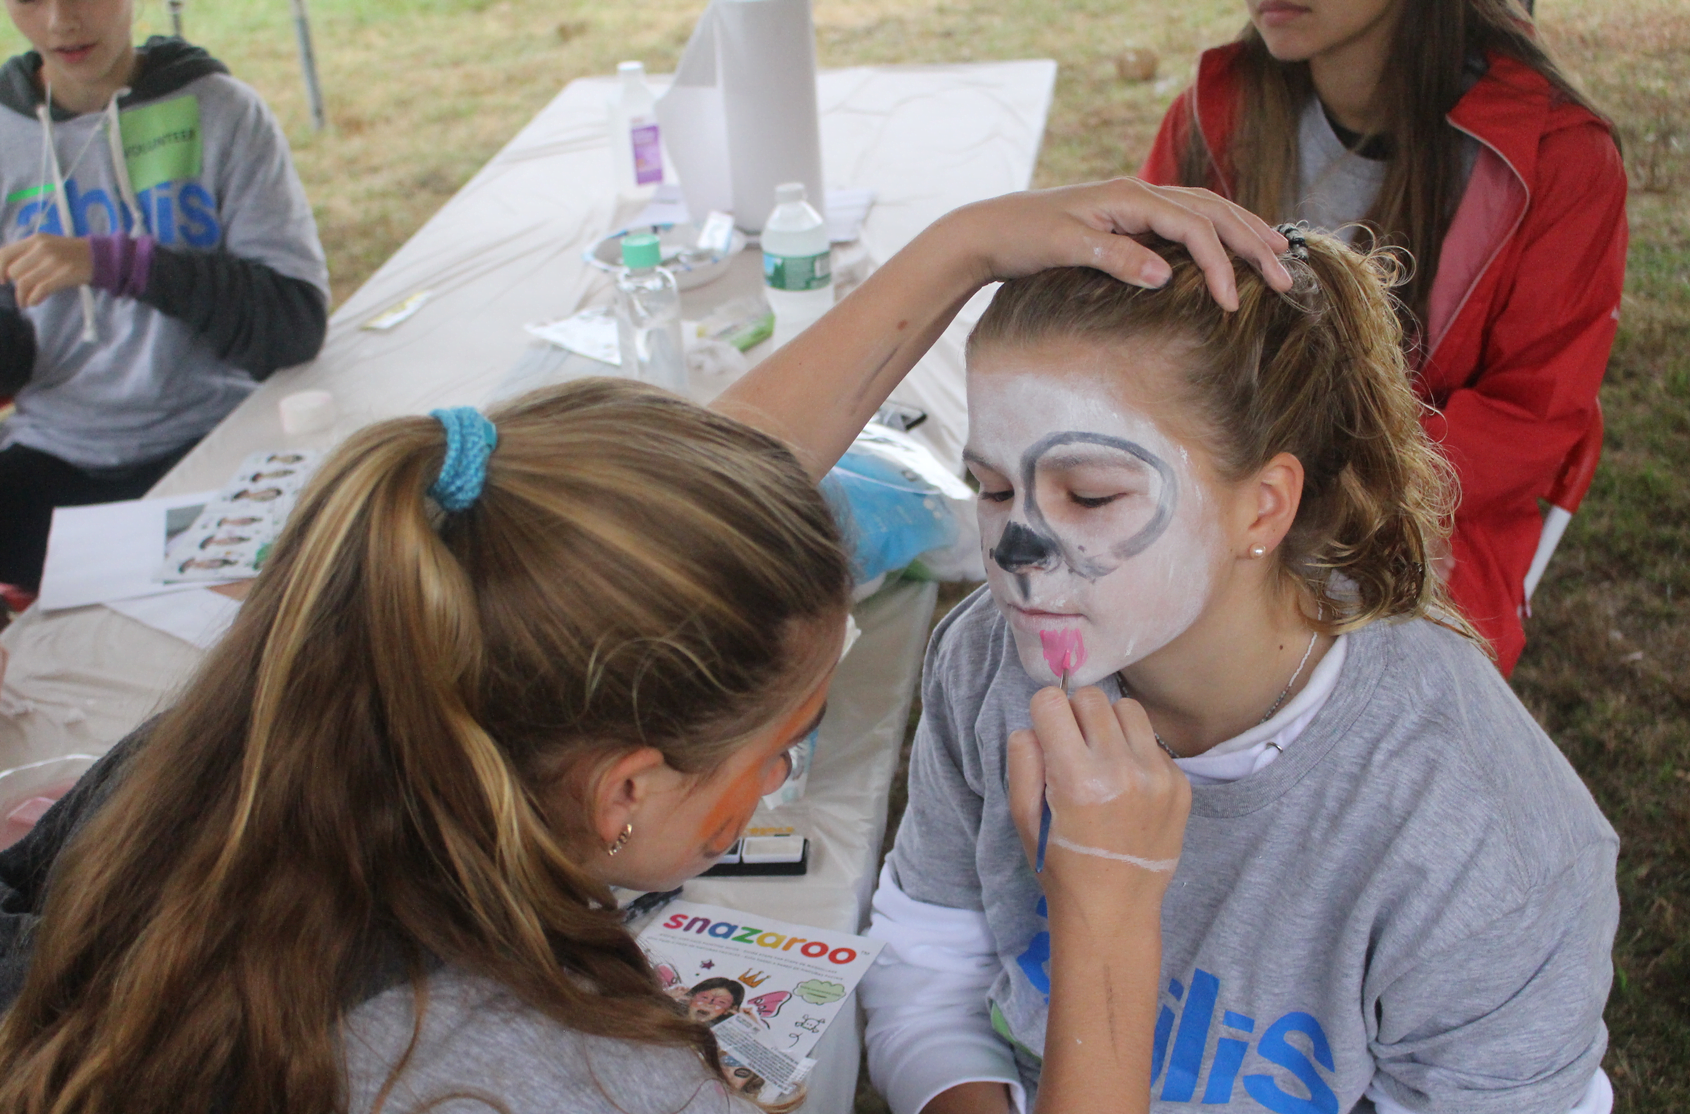 Face painting was one of the activities at the annual Abilis Run/Walk. Oct 15, 2017 Photo: Leslie Yager